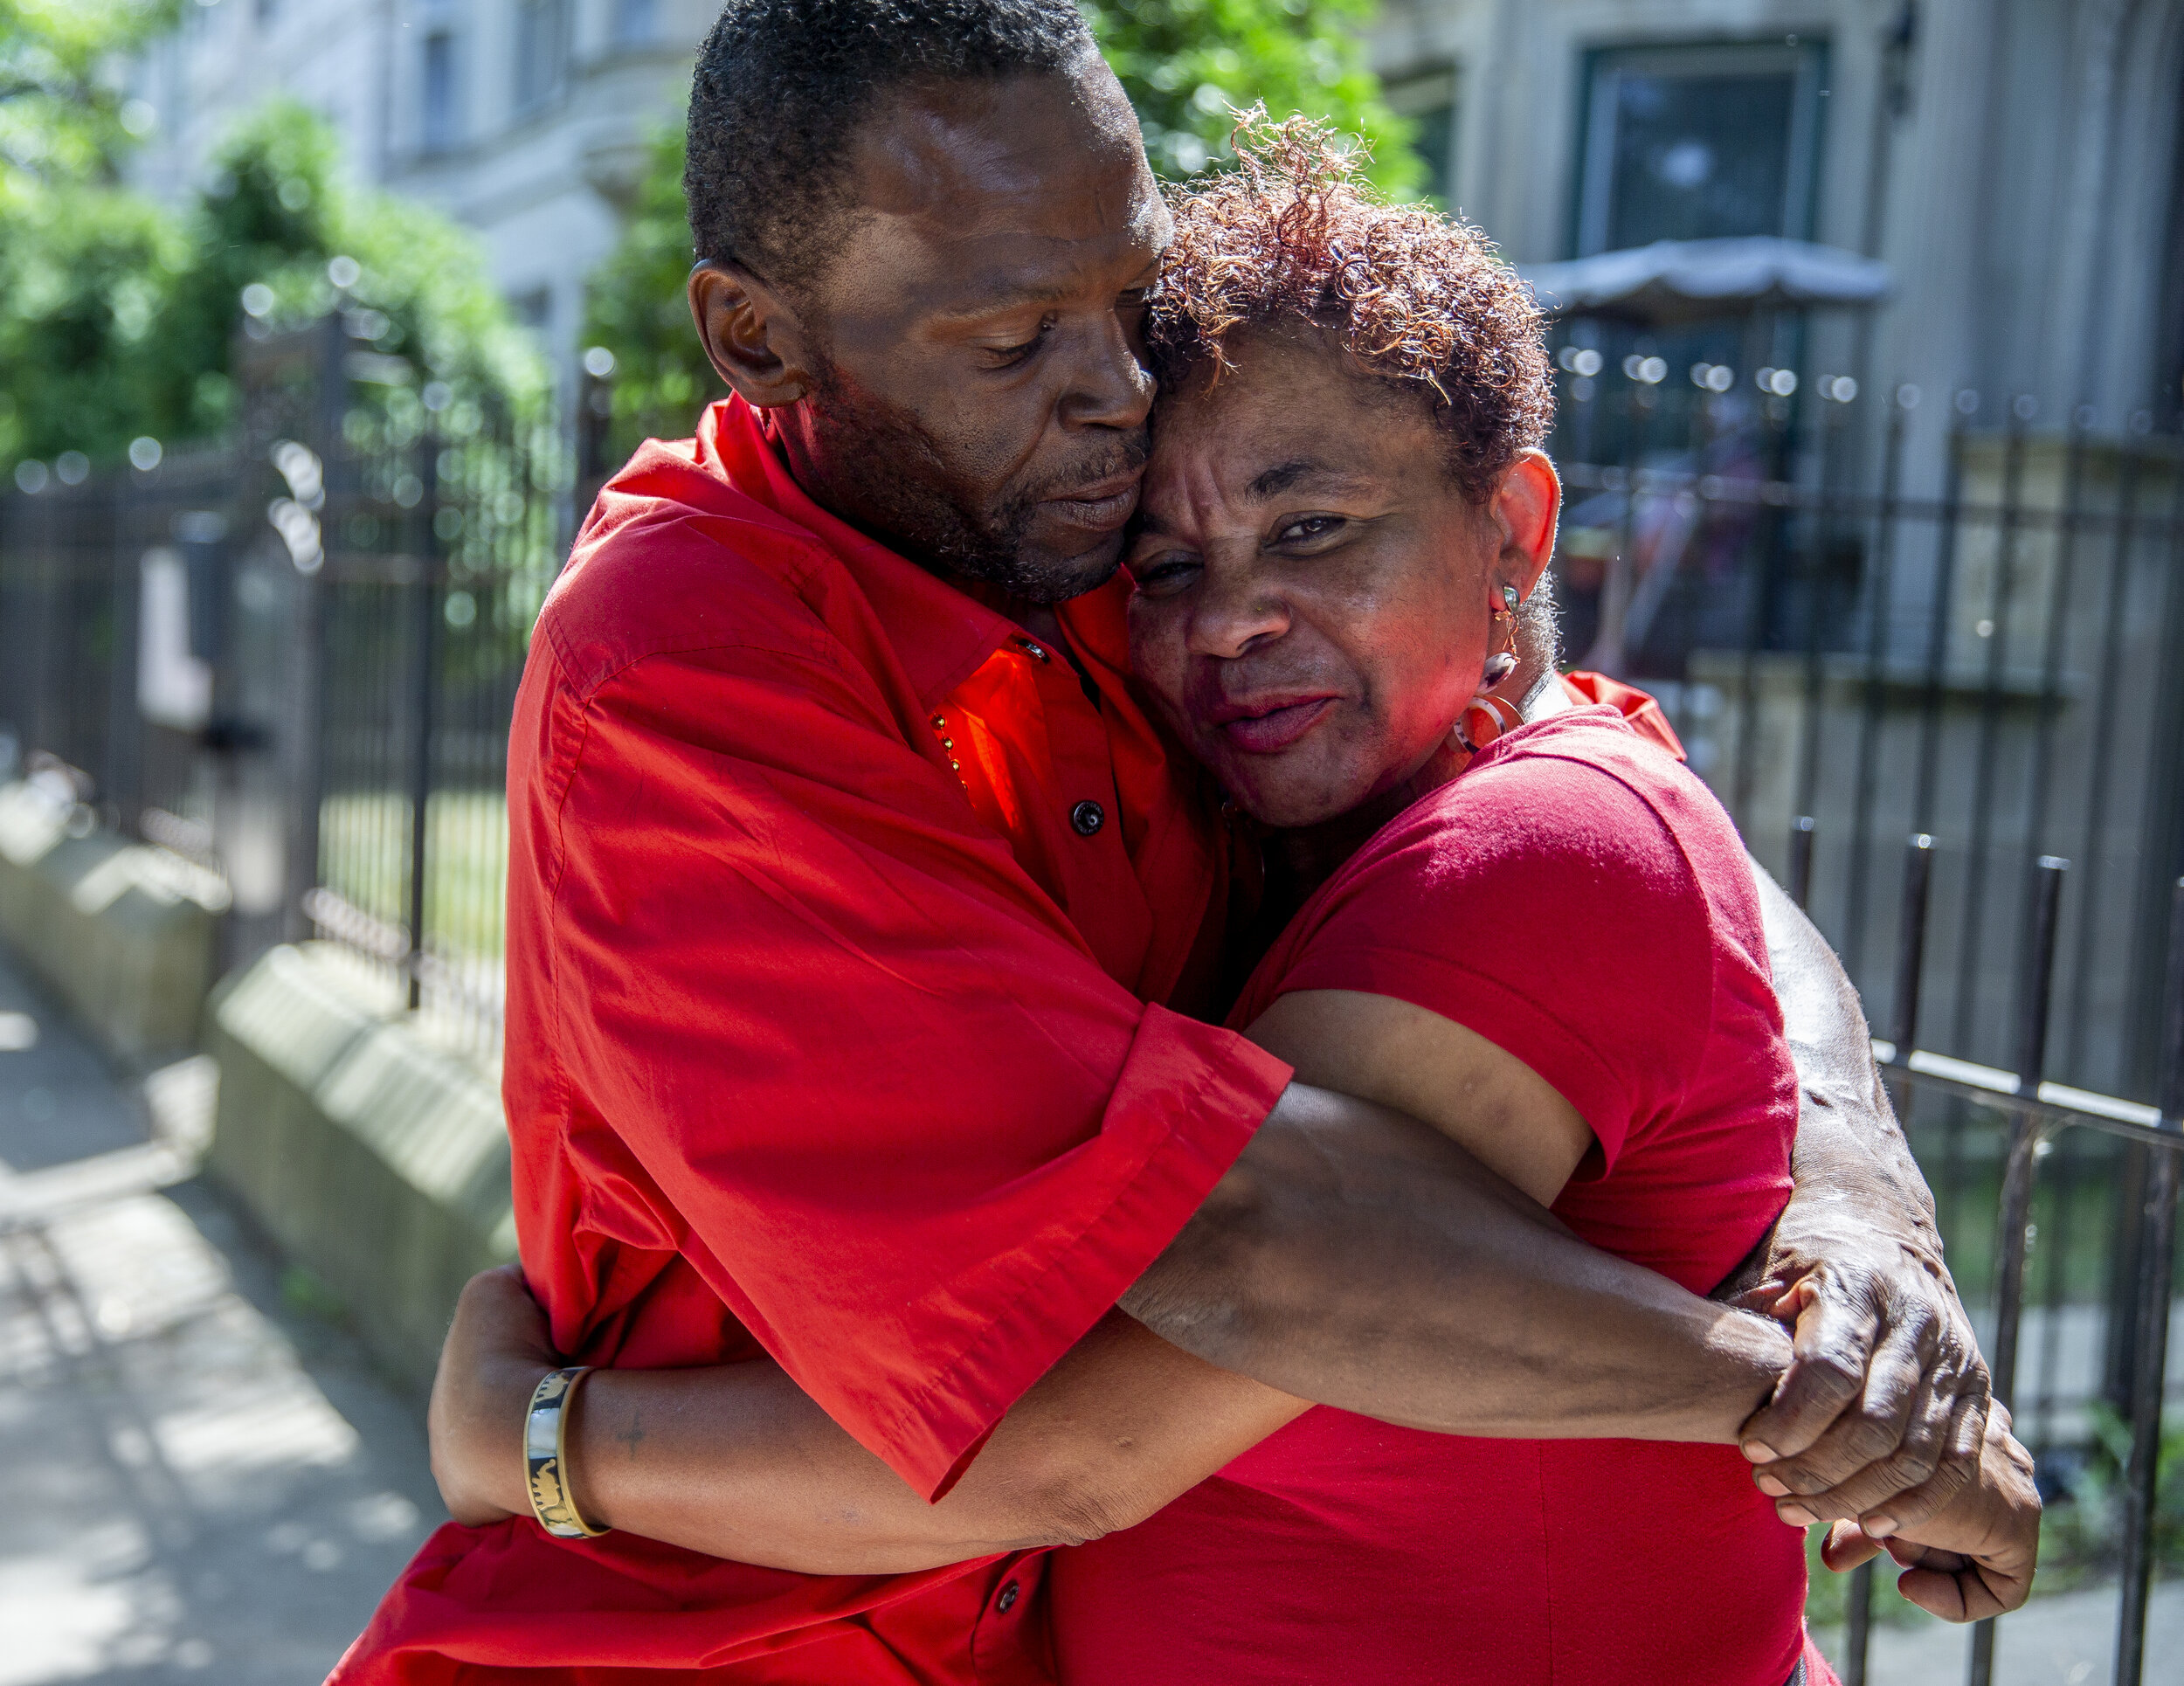  Nicole Smith and John Ray, who are in a long-time relationship, embrace during the 90th annual Bud Billiken parade in Chicago's Bronzeville neighborhood Saturday, August 10, 2019. Ray says, " I enjoy coming here because its my favorite parade... it'